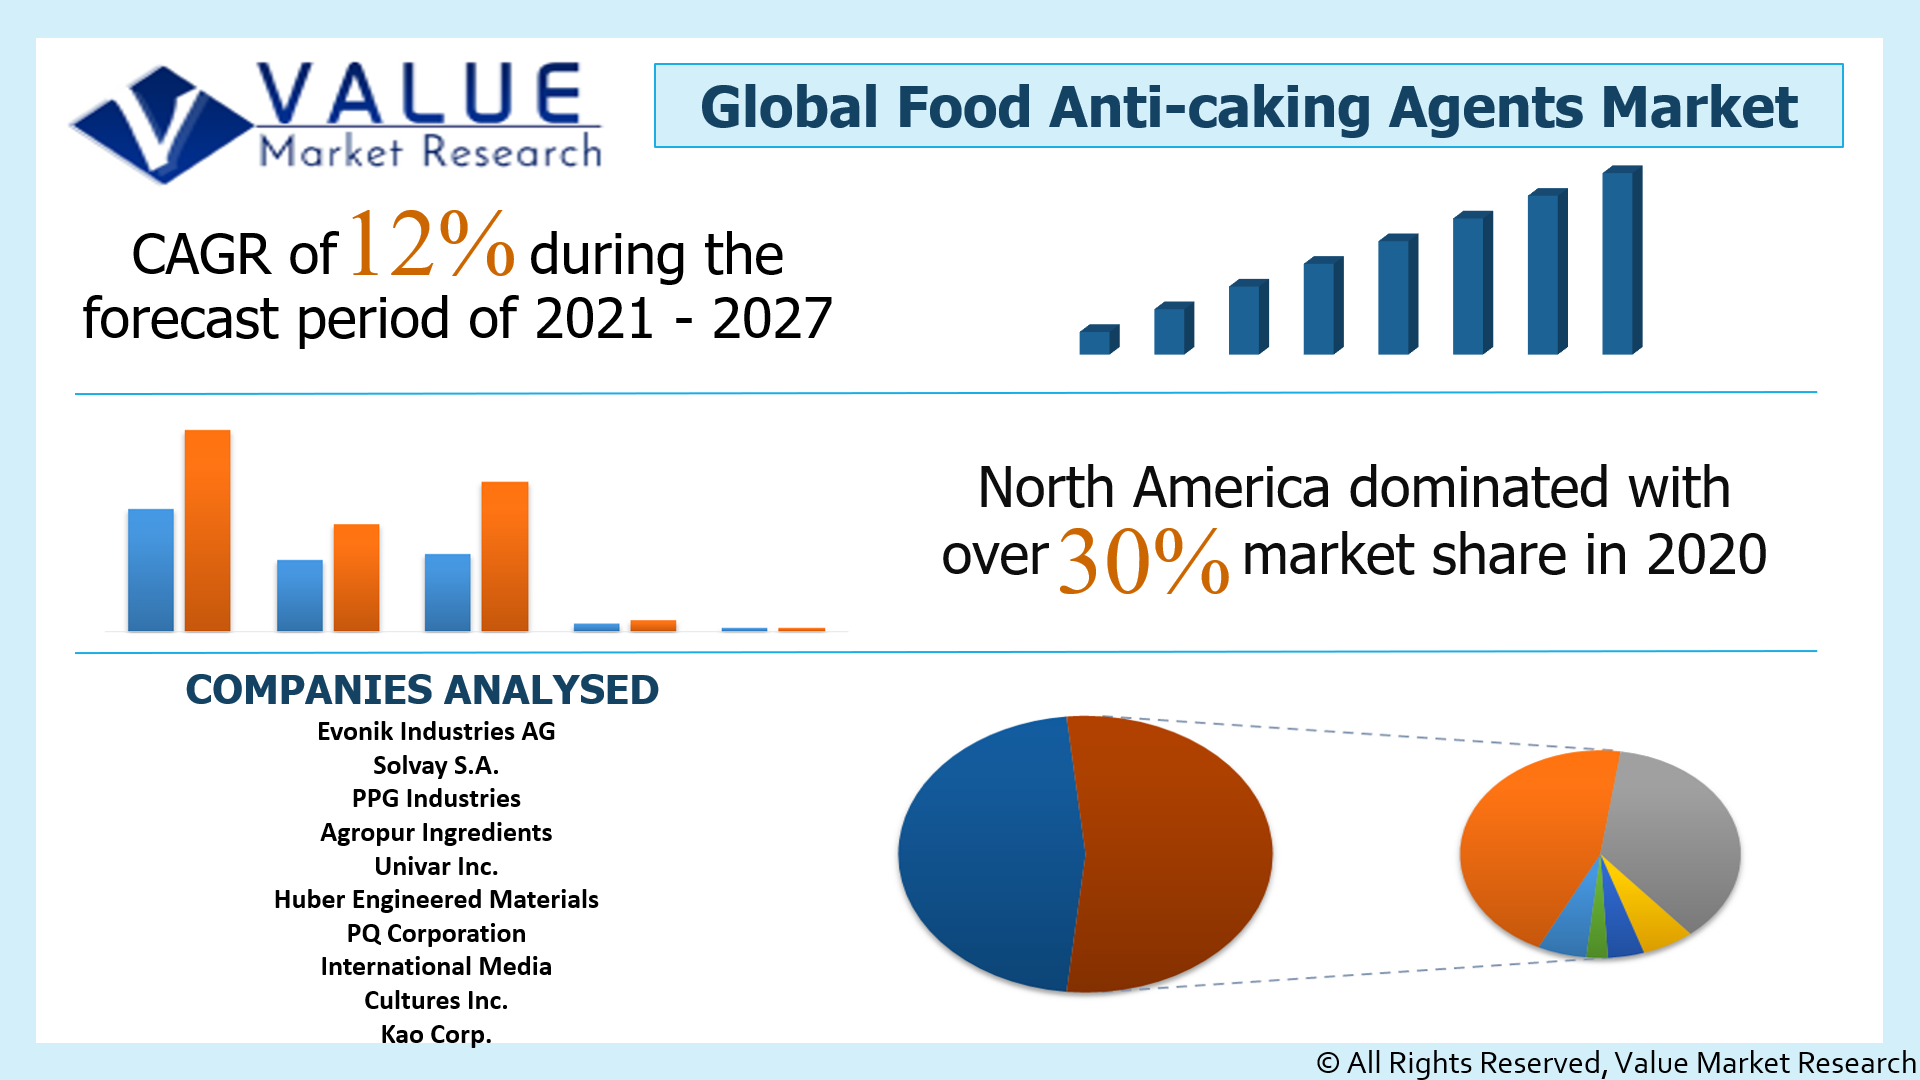 Global Food Anti-caking Agents Market Share